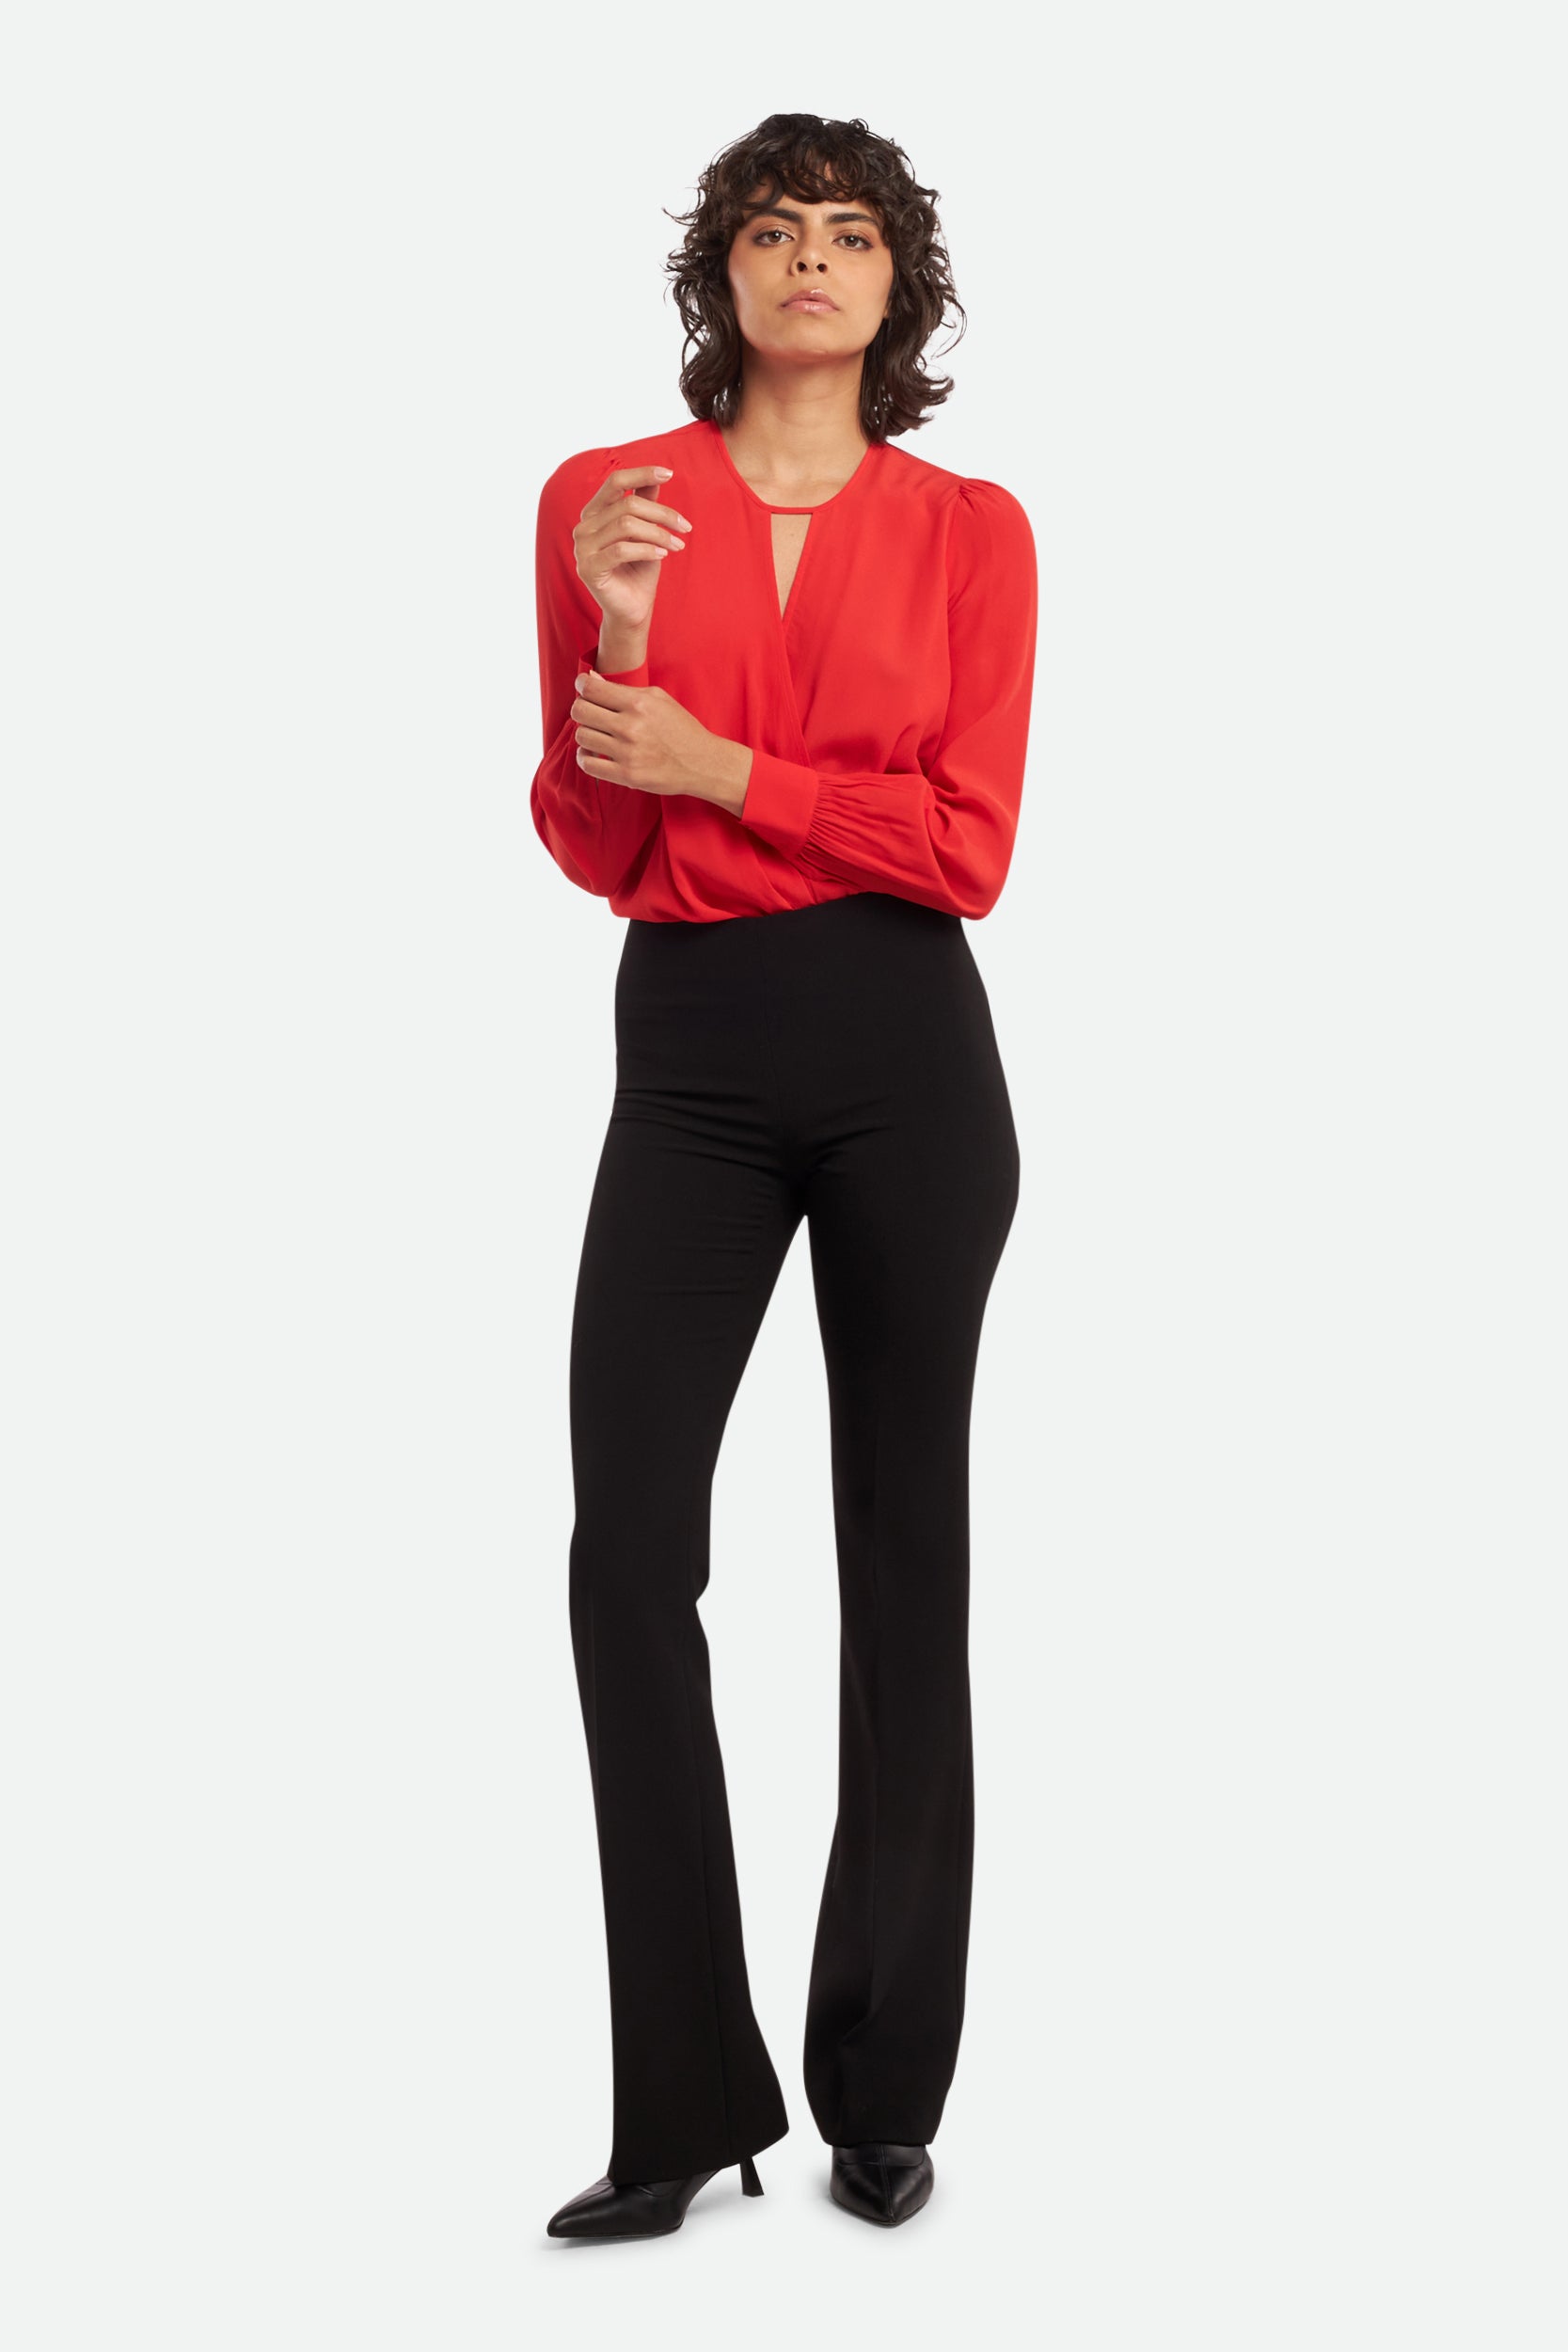 Twinset Body a Blusa Rosso